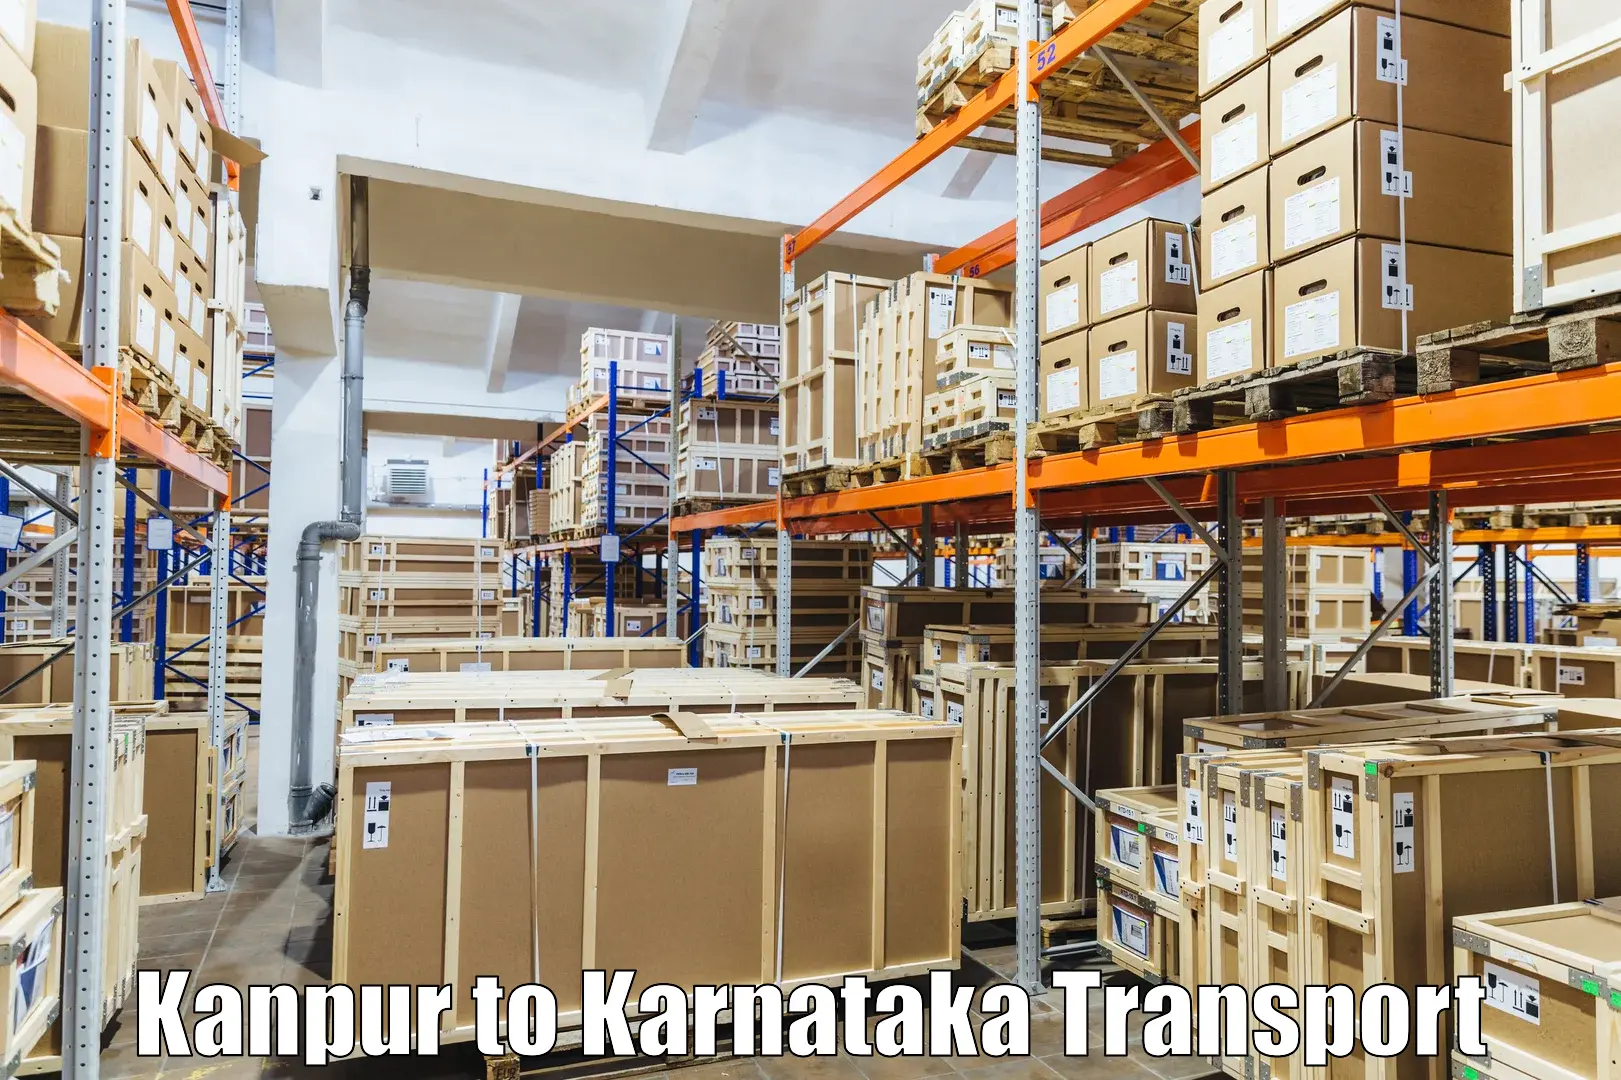 Transportation solution services in Kanpur to Hagaribommanahalli